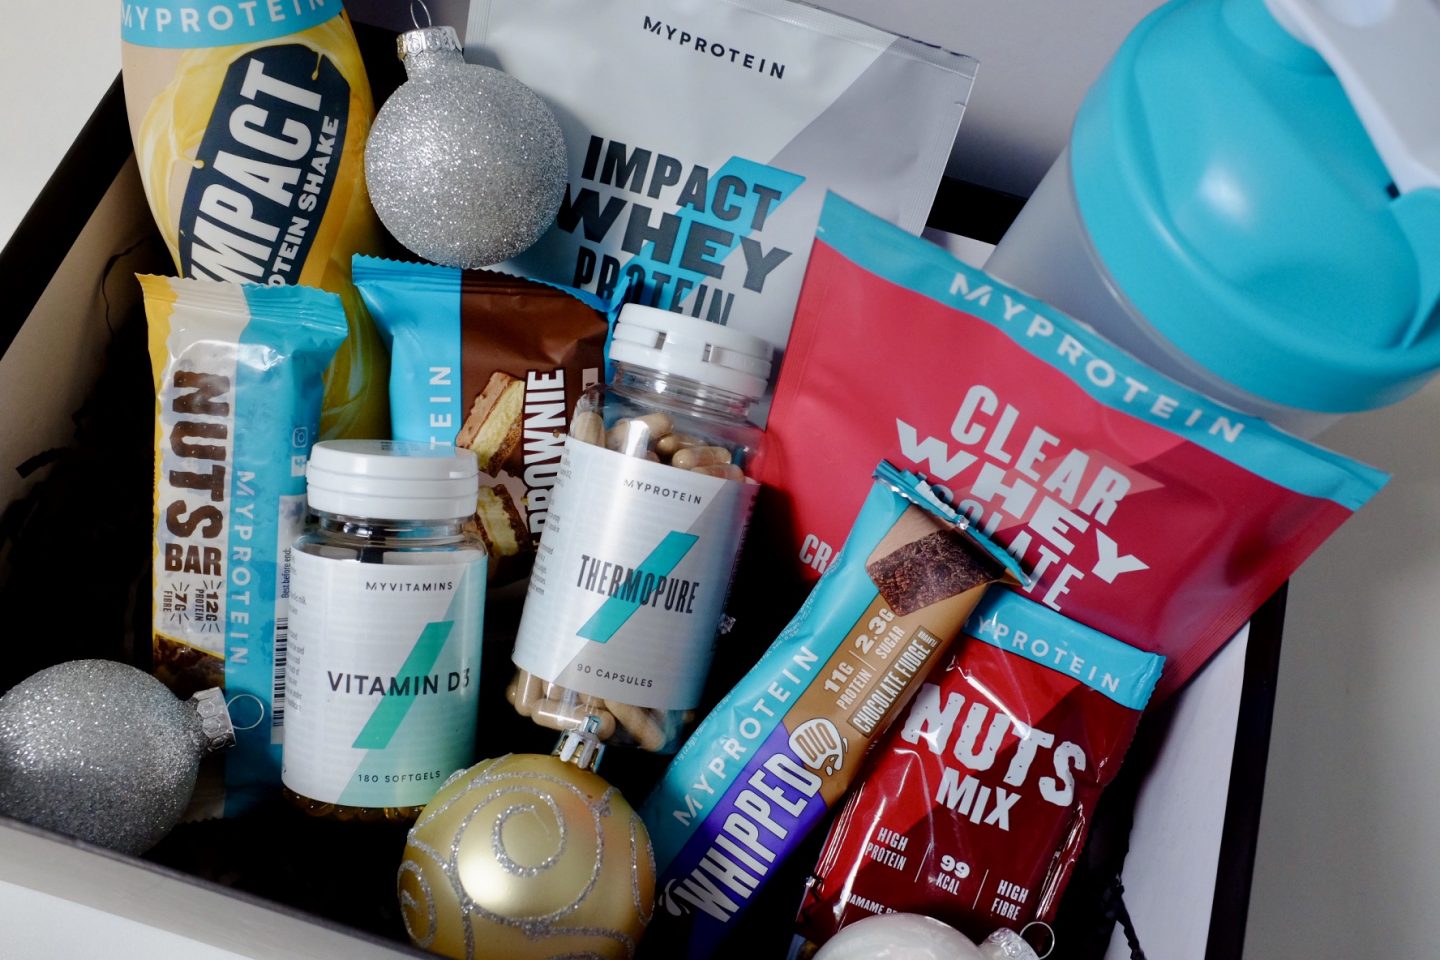 My Protein black Friday box fitness lovers gift ideas